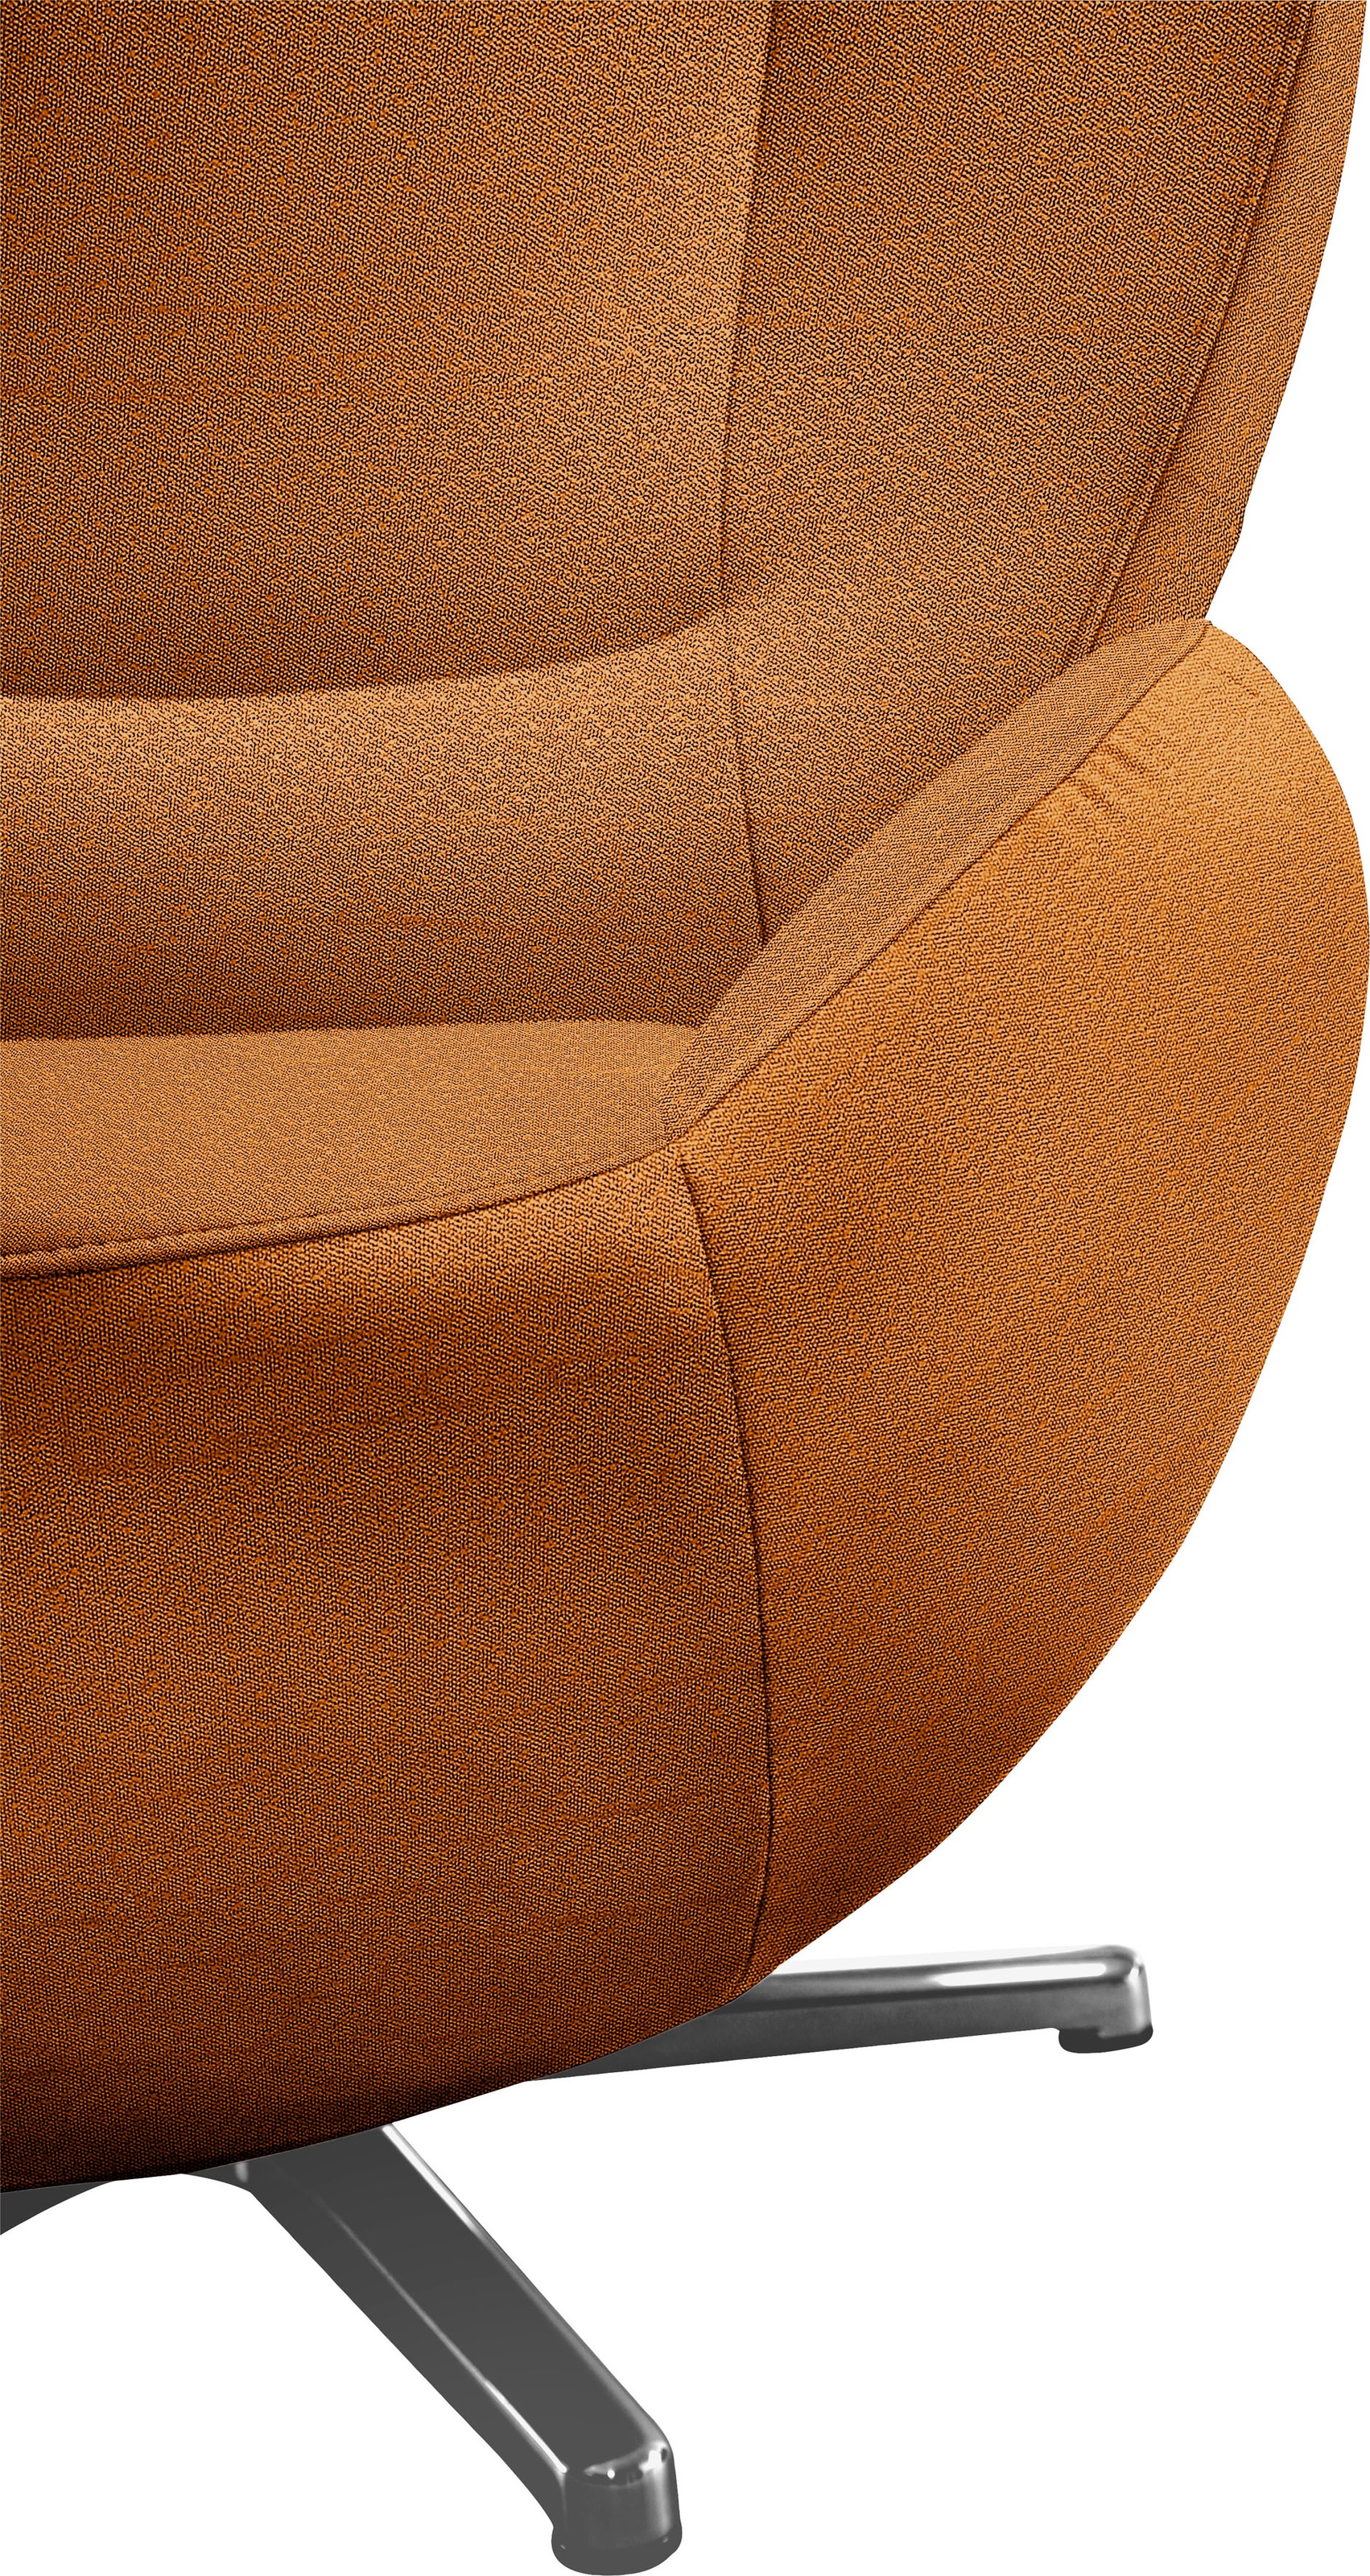 TOM TAILOR HOME Loungesessel PURE«, | BAUR »TOM Chrom Metall-Drehfuß in mit